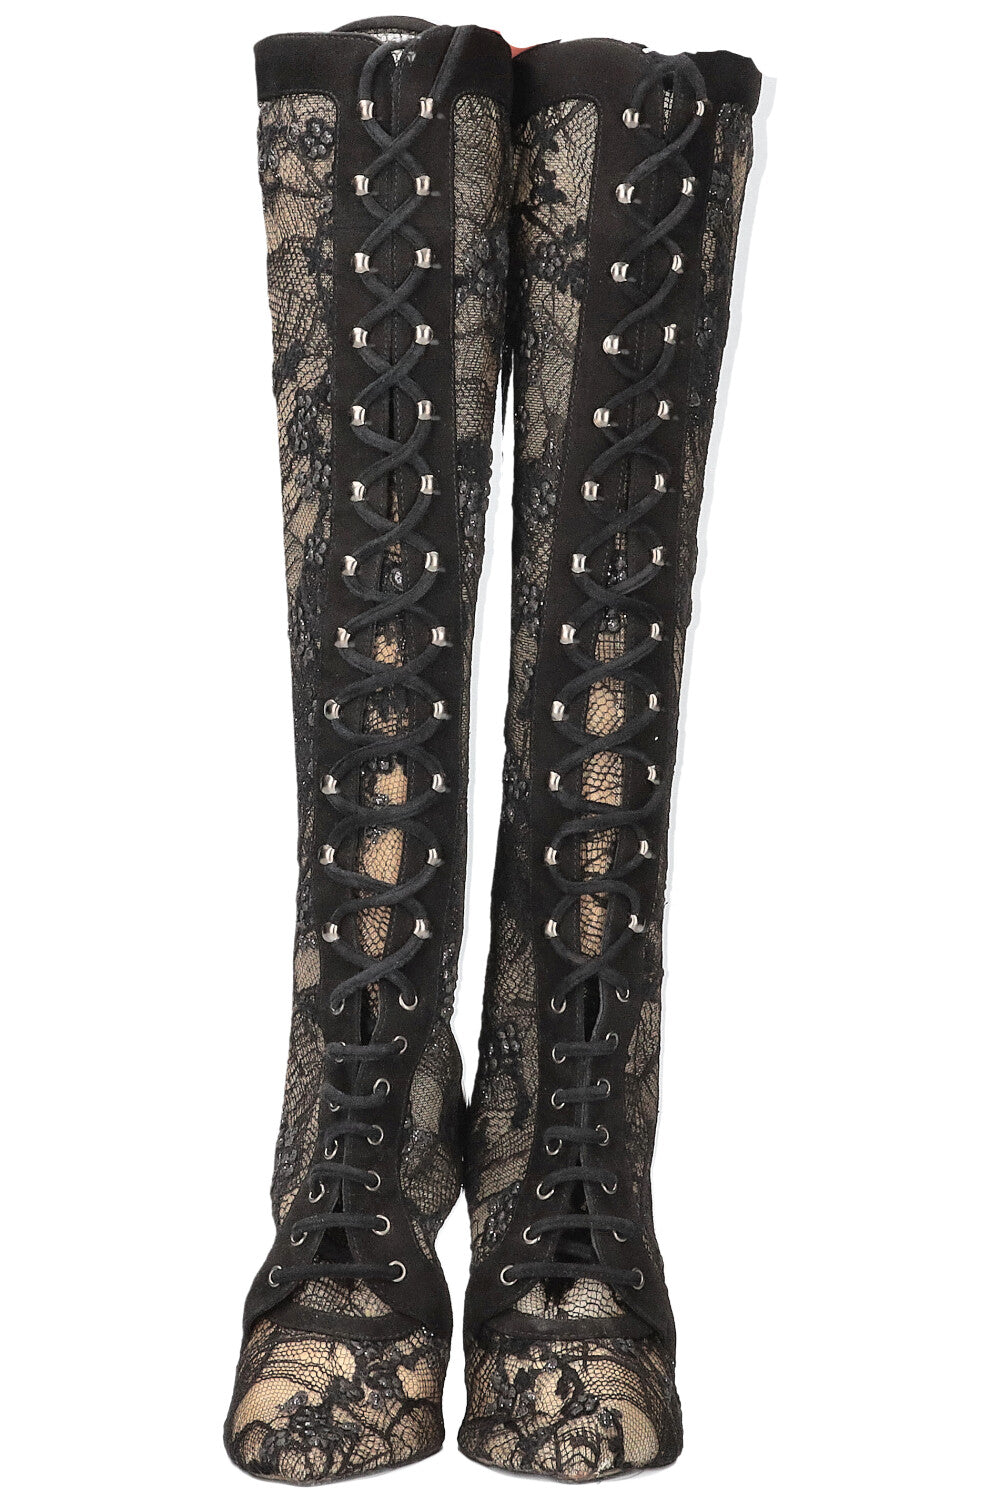 SERGIO ROSSI Lace & Crystal Boots Black